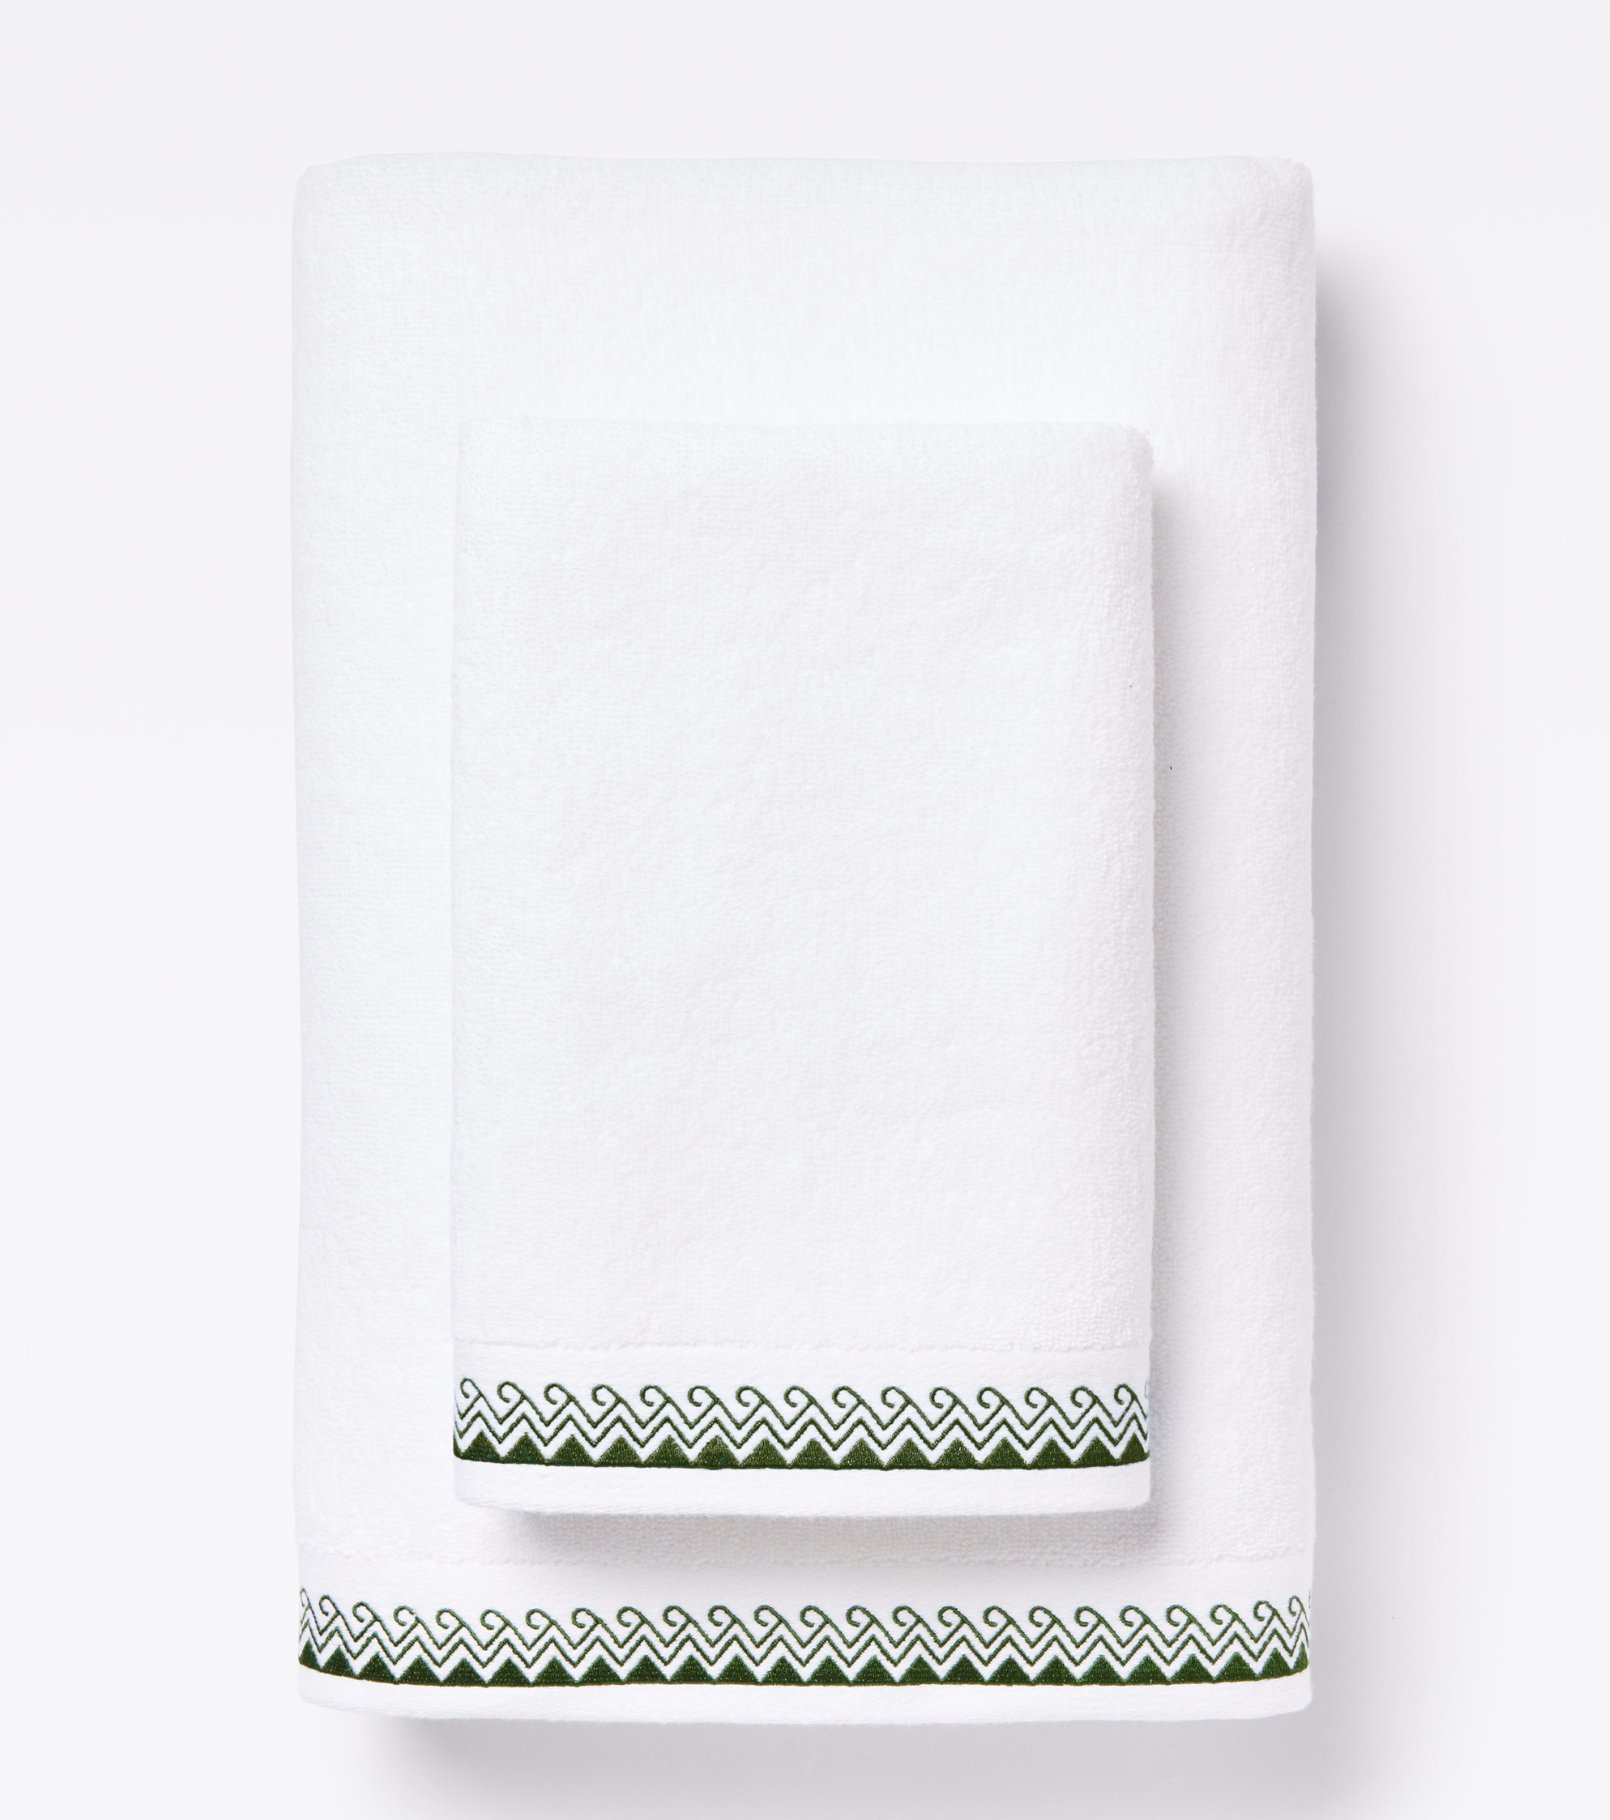 Averylily Wind + Wave Bath and Hand Towels in White with Palm Green trim, made from 600-gram weight pure Aegean cotton.